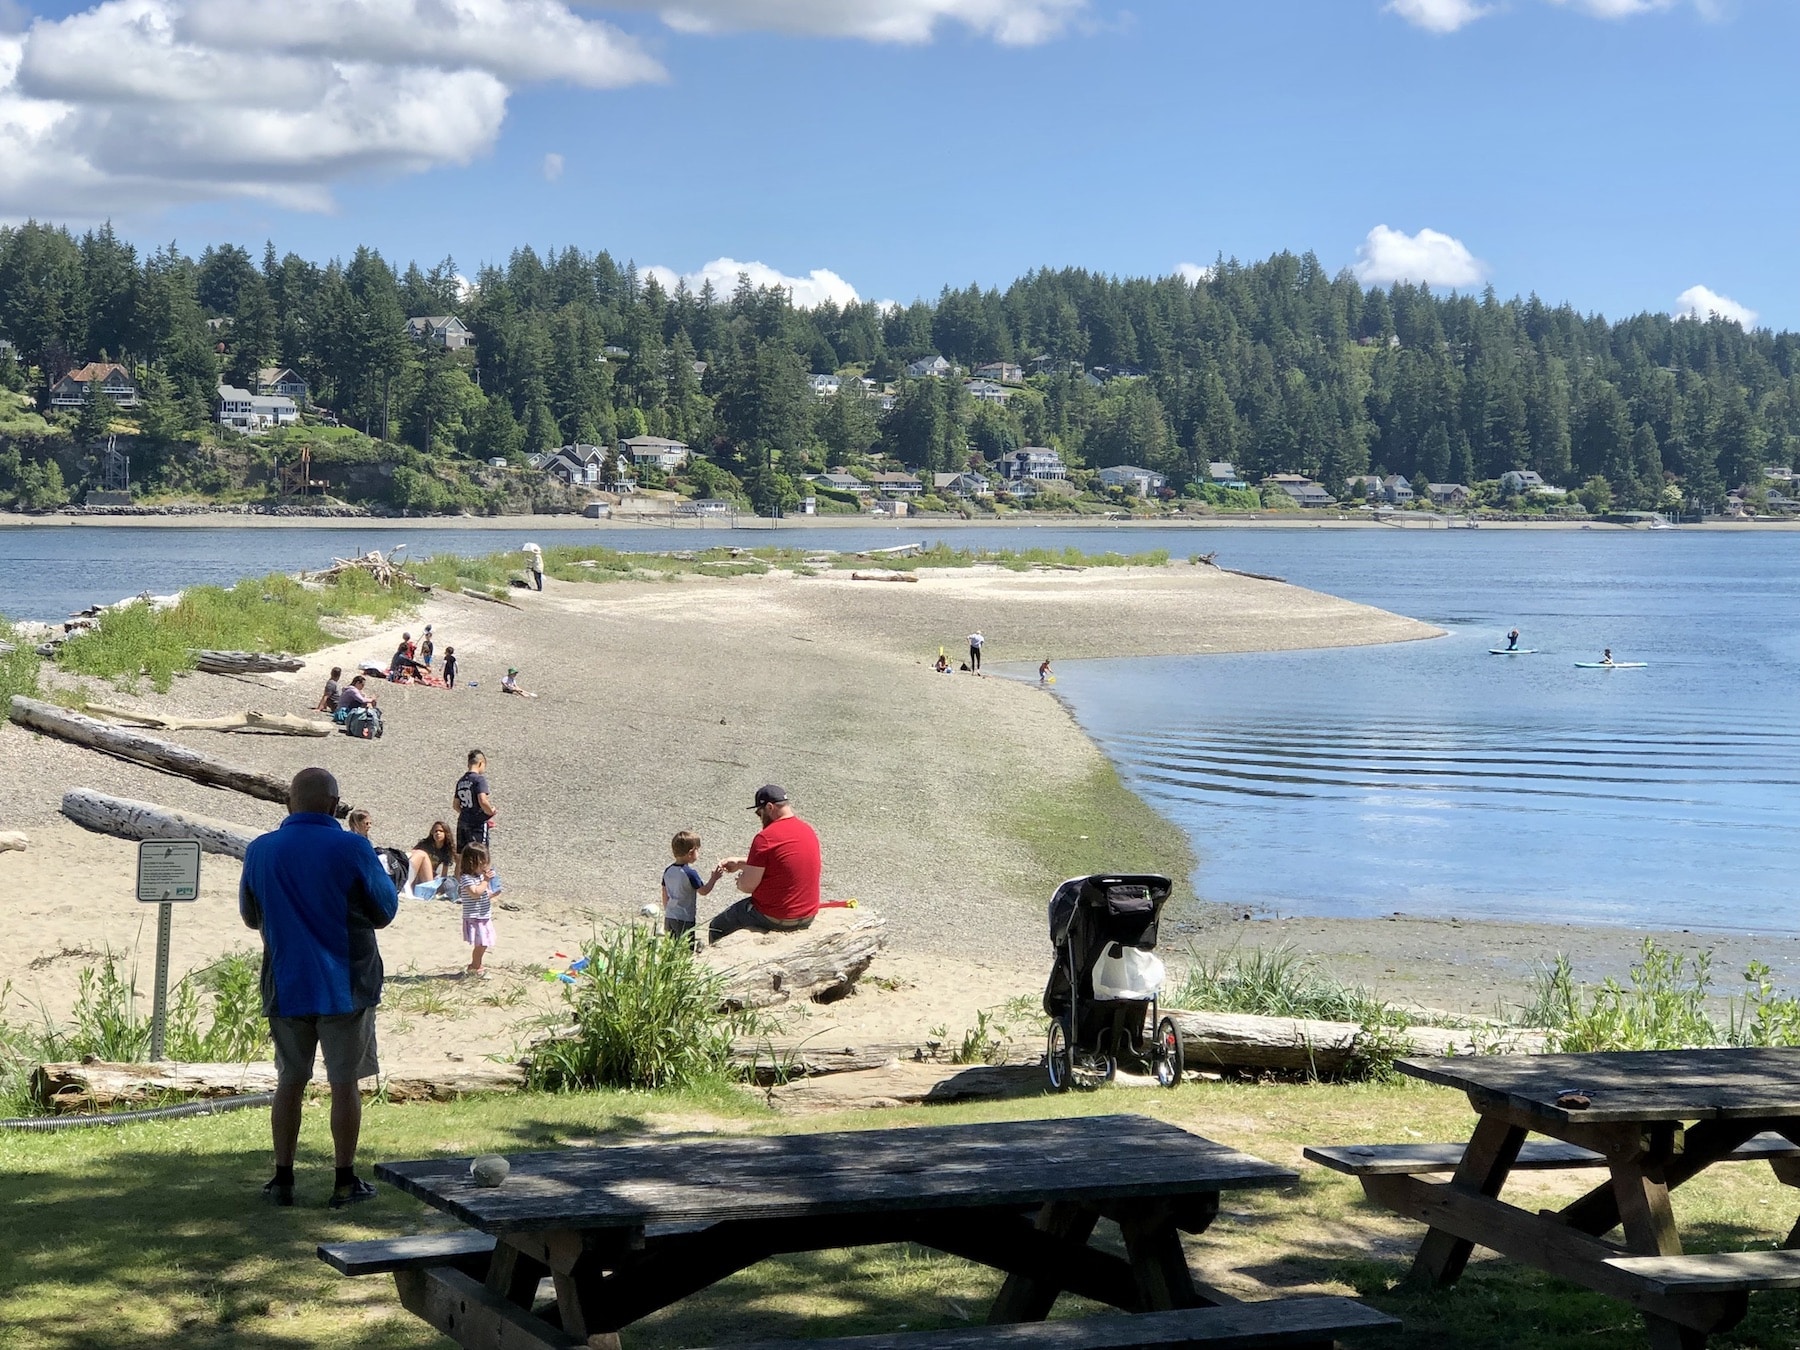 PenMet took a step toward approving a master plan for Tacoma DeMolay Sandspit Nature Preserve.